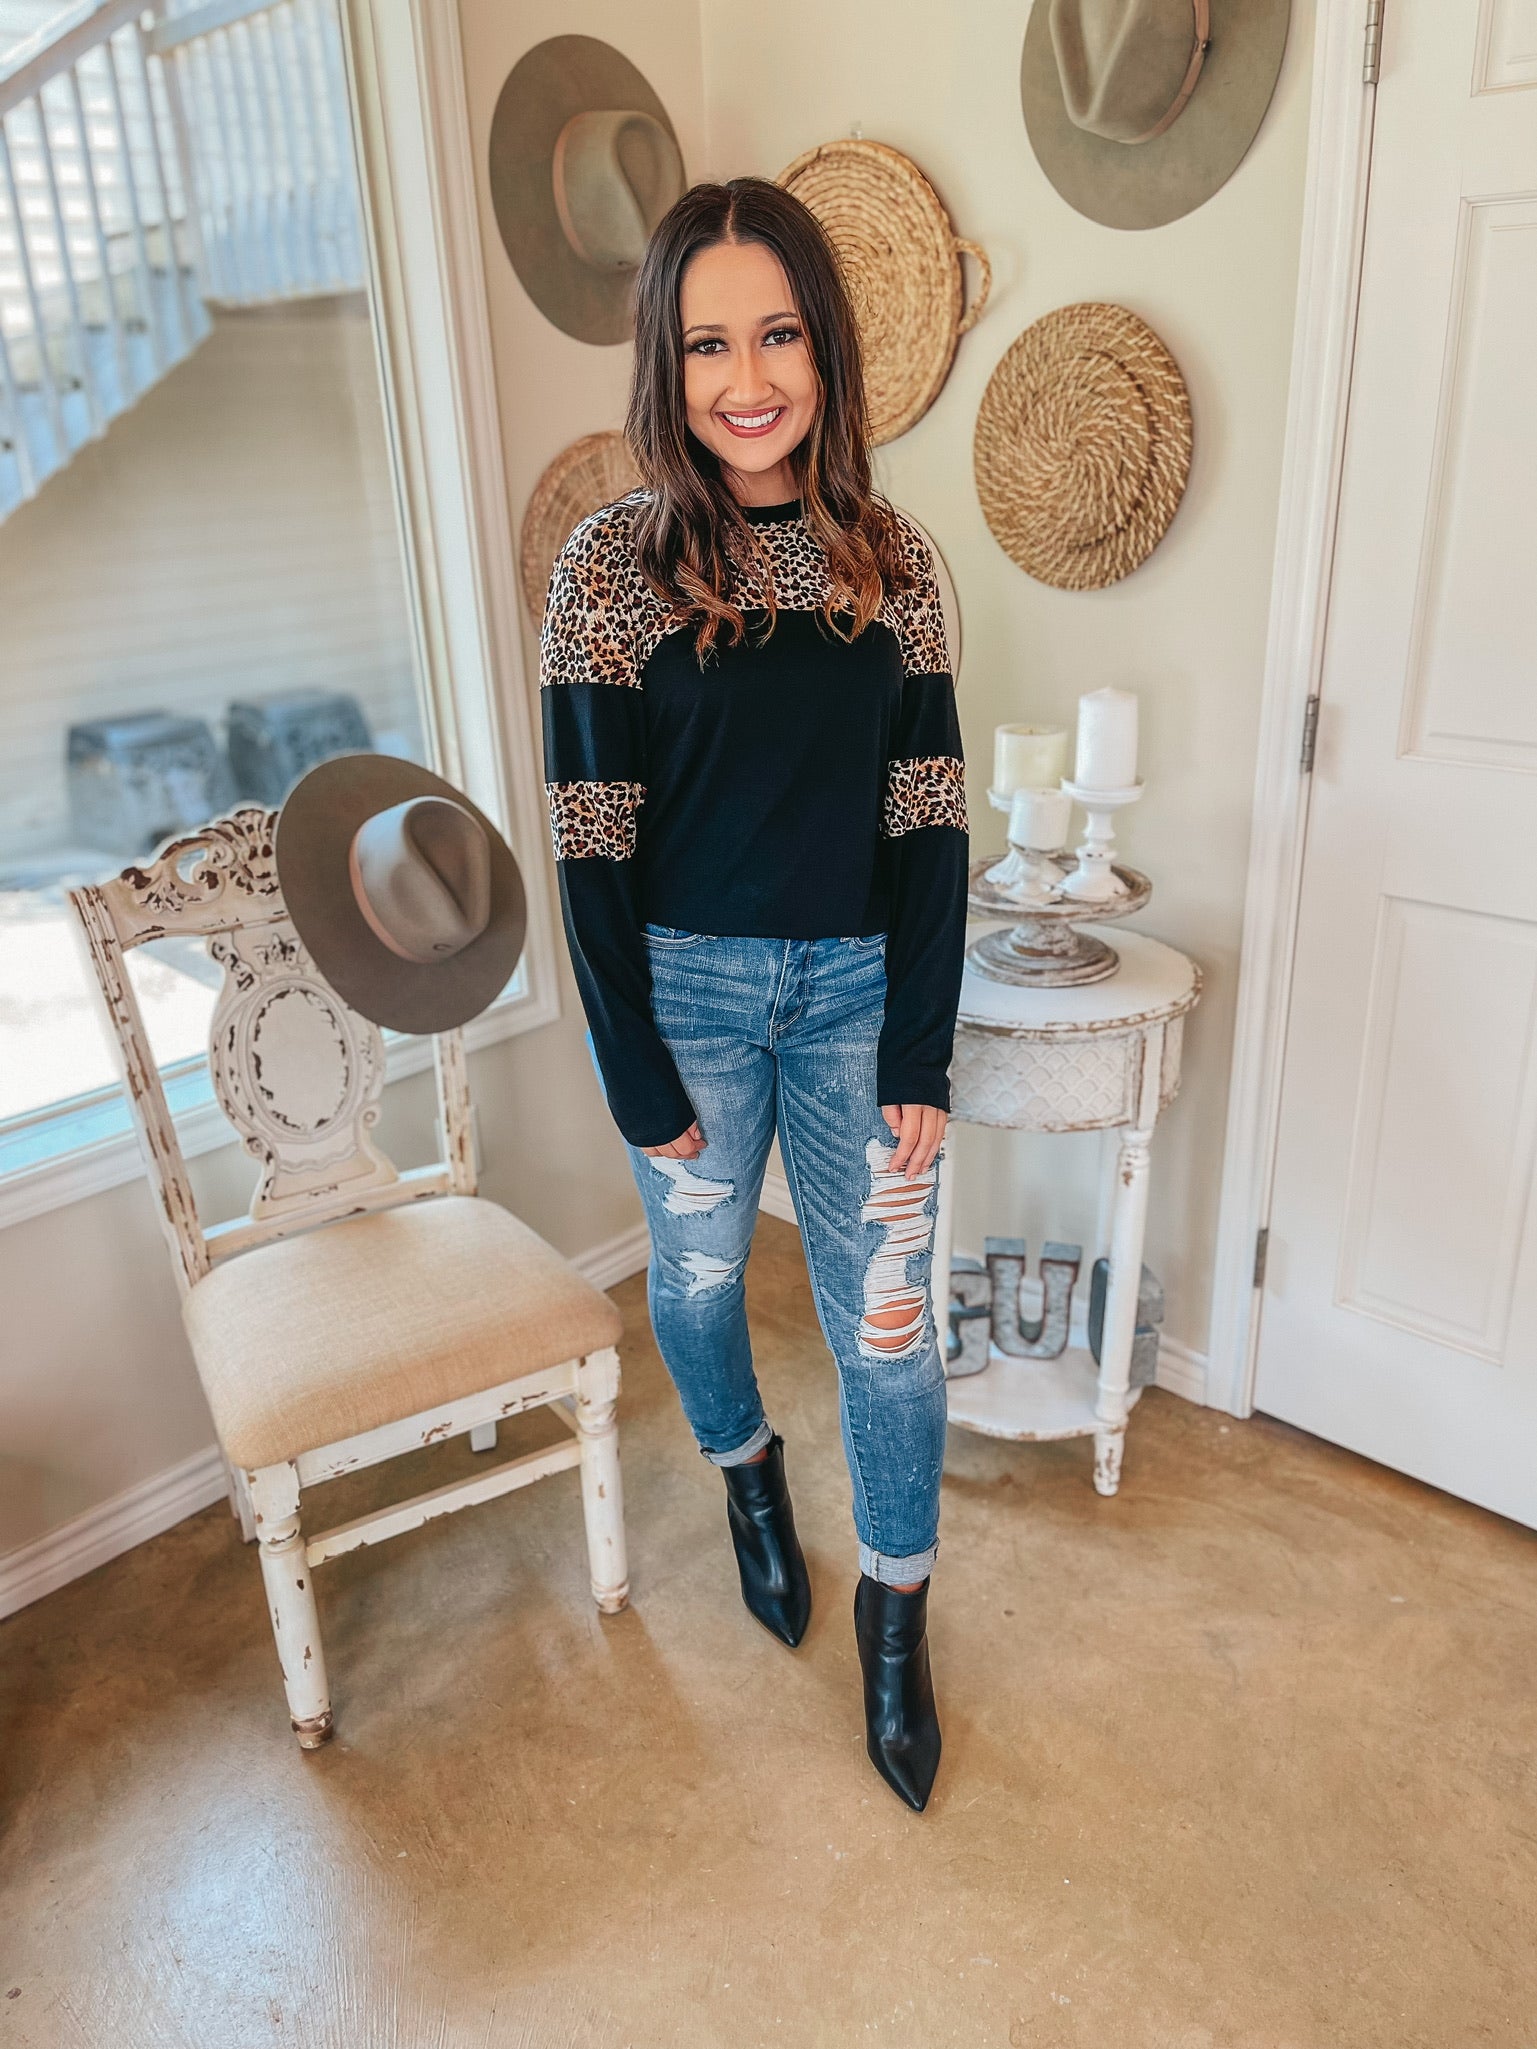 Get the Look Leopard Upper and Elbow Long Sleeve Top in Black - Giddy Up Glamour Boutique